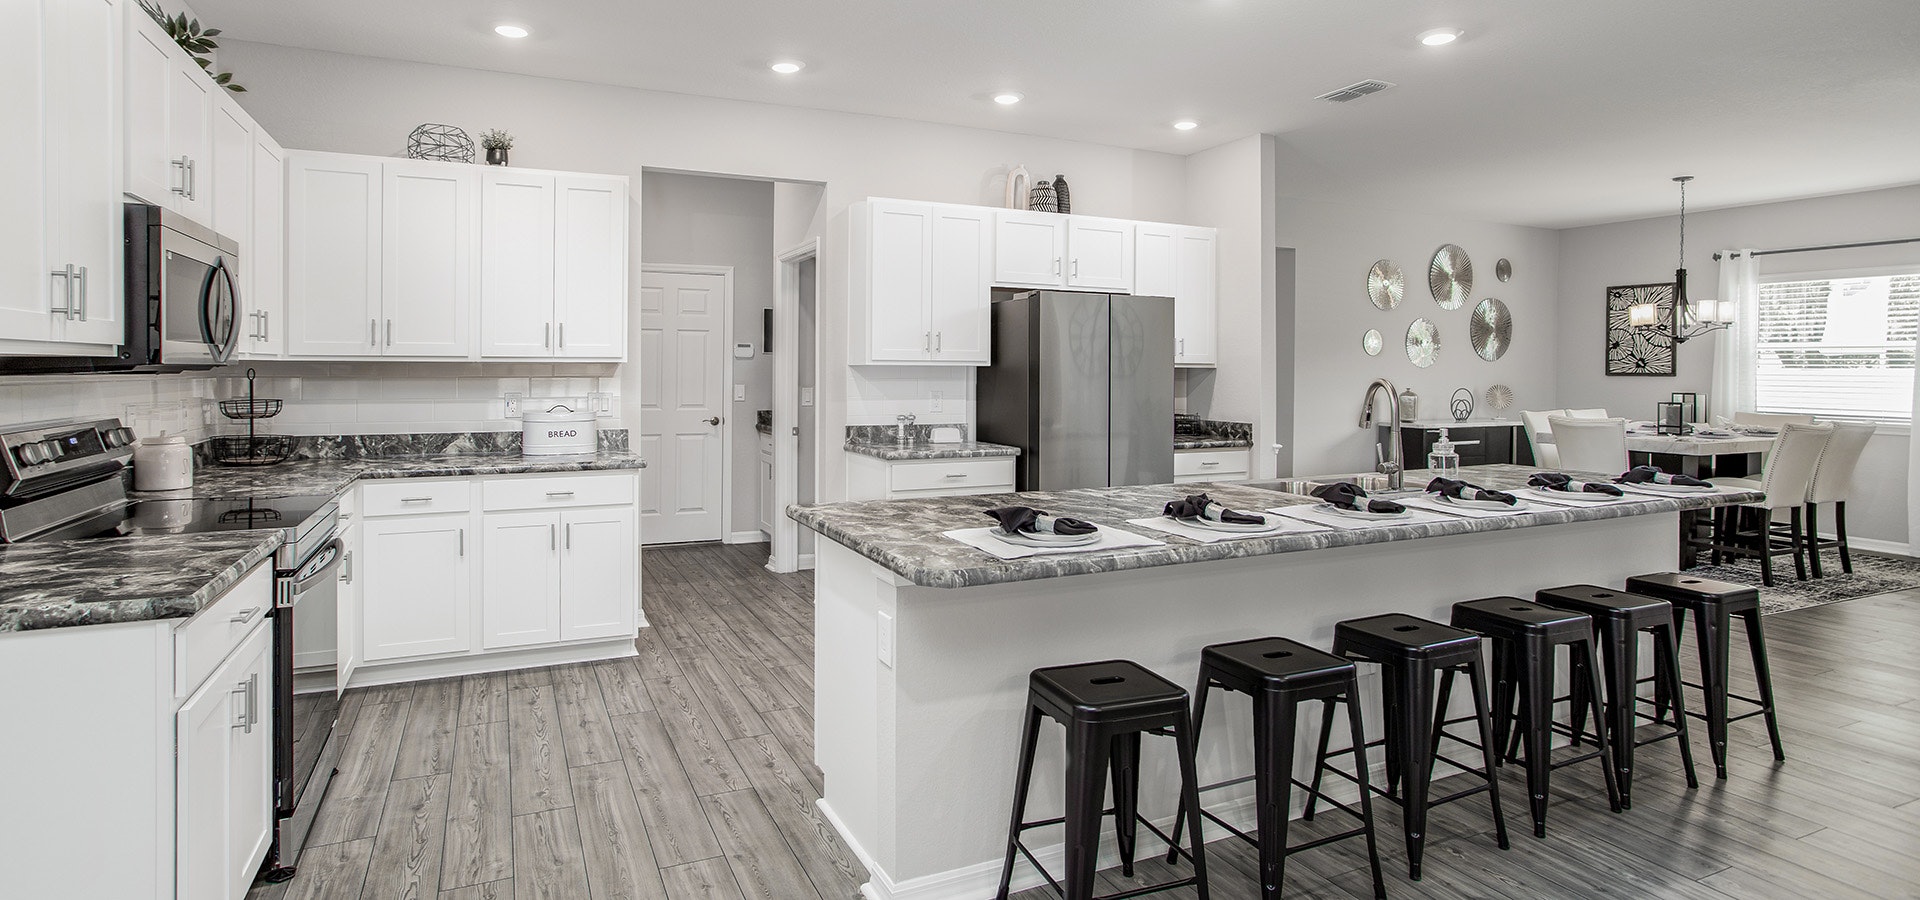 The Summerlyn, a new construction home available in Silver Springs Shores in Ocala